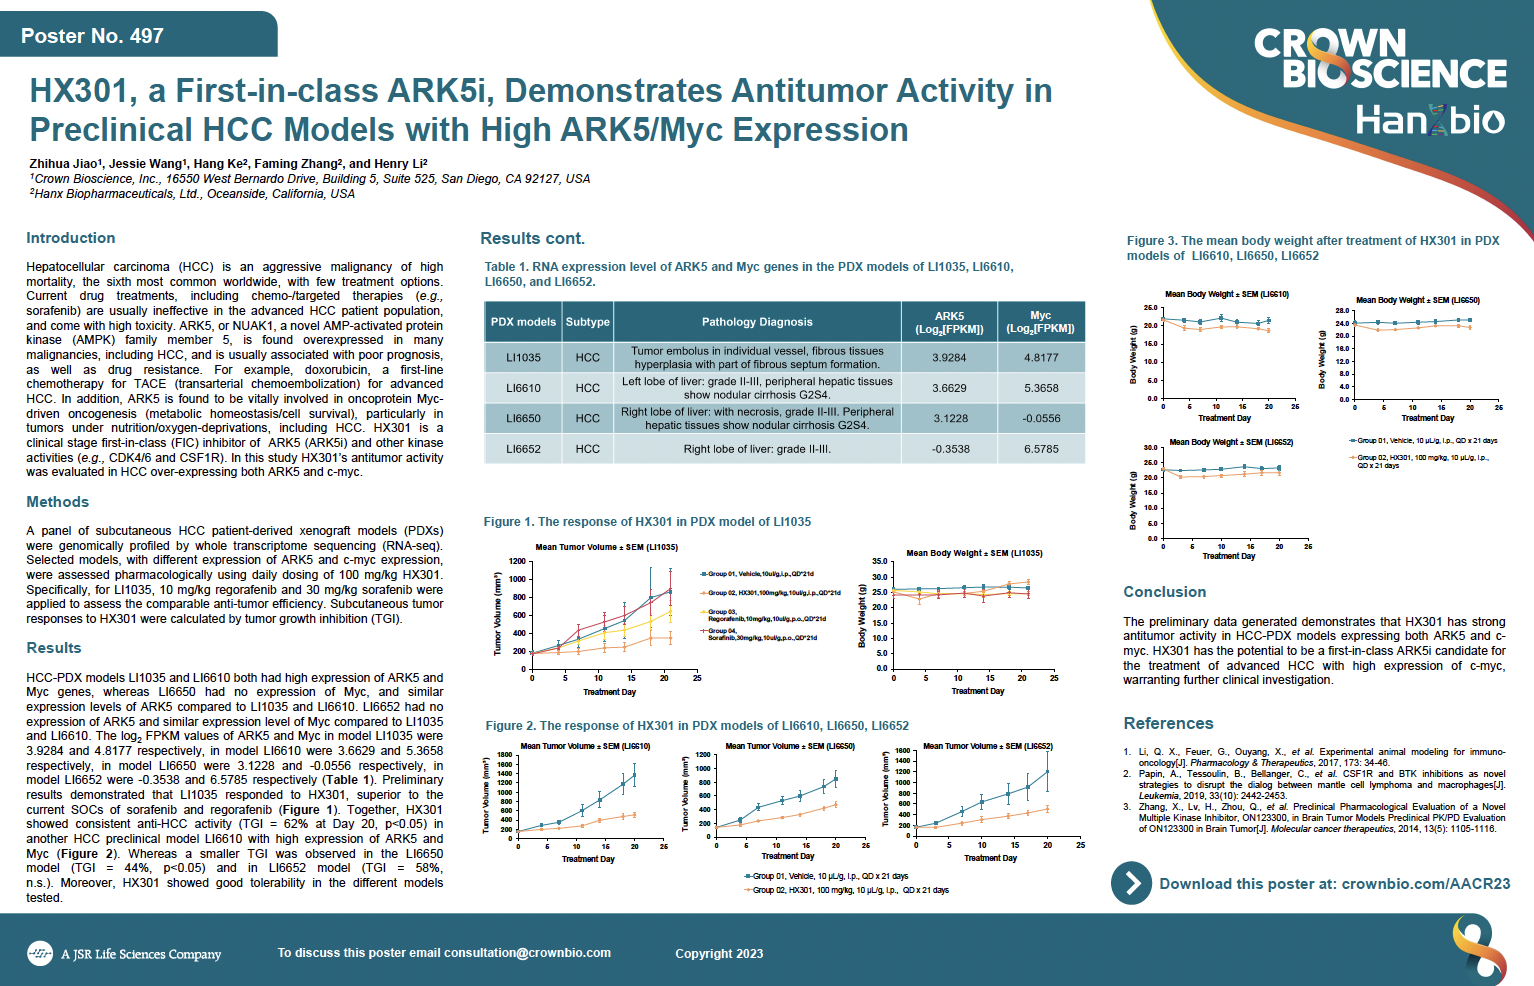 AACR 2023 Posters 497: HX301, a First-in-class ARK5i, Demonstrates Antitumor Activity in Preclinical HCC Models with High ARK5/Myc Expression